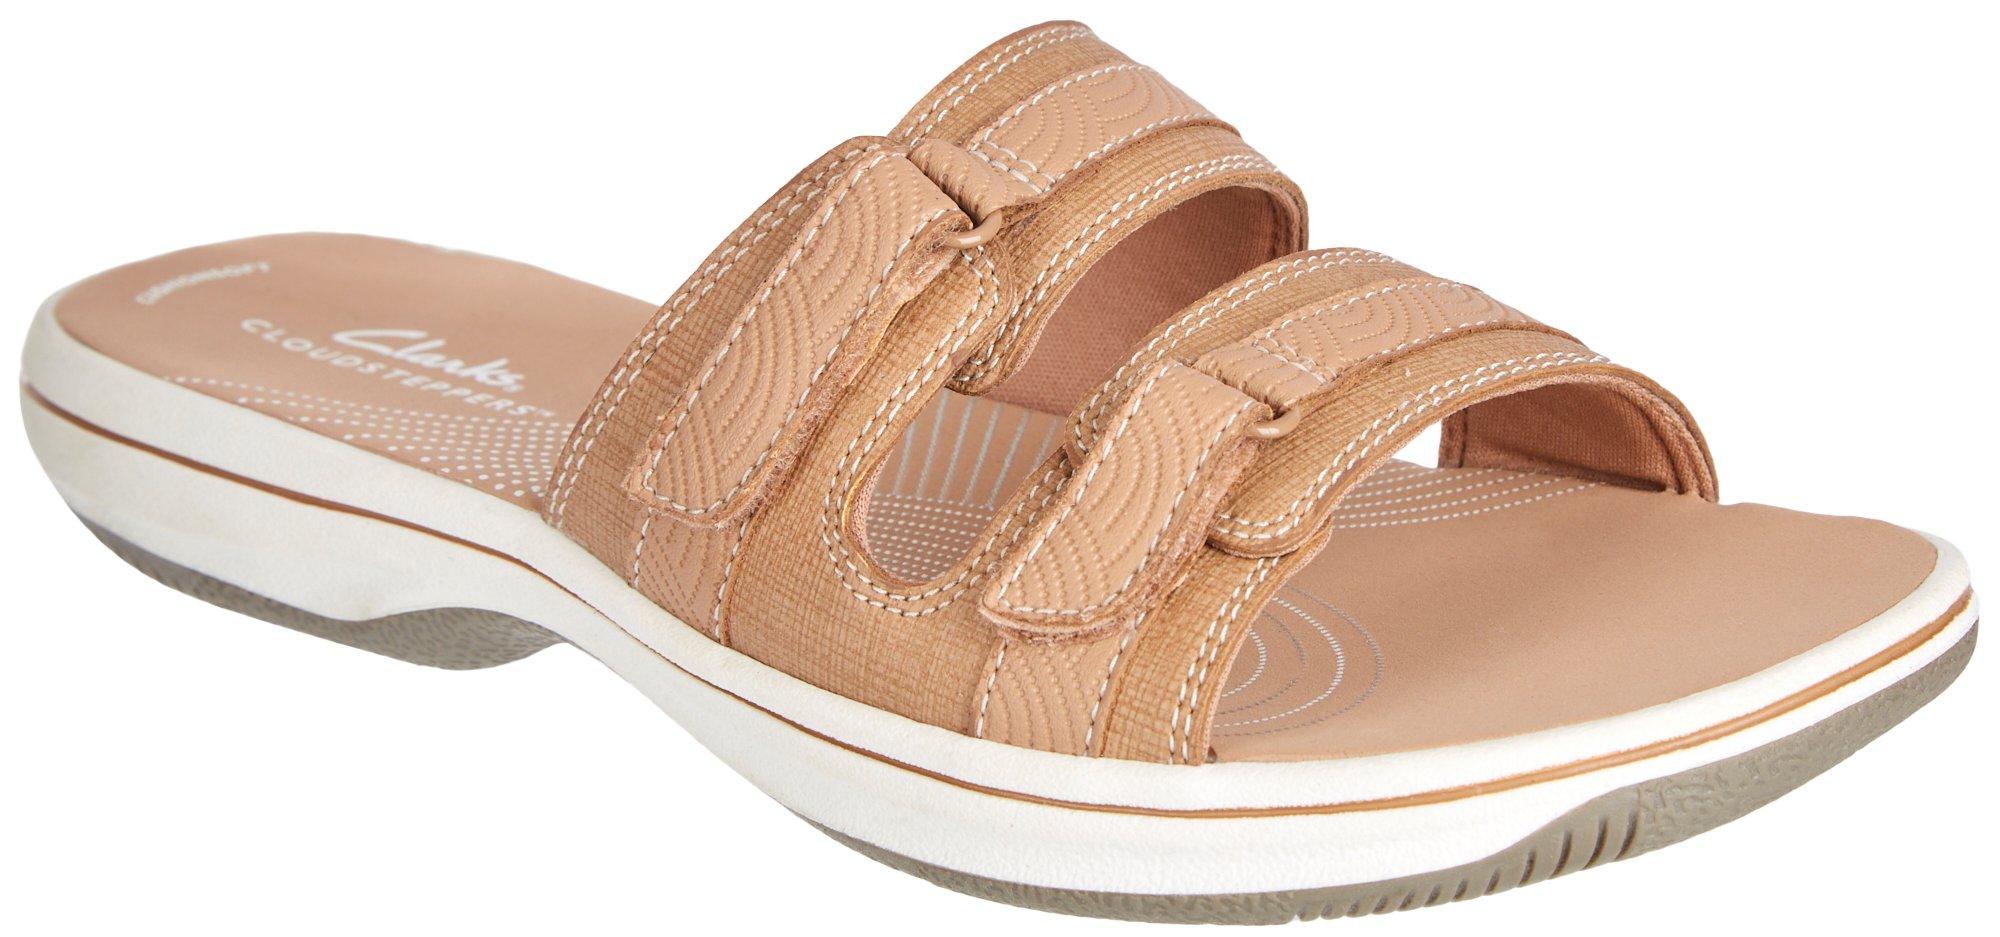 Clarks Womens Cloudsteppers Breeze Piper Sandal